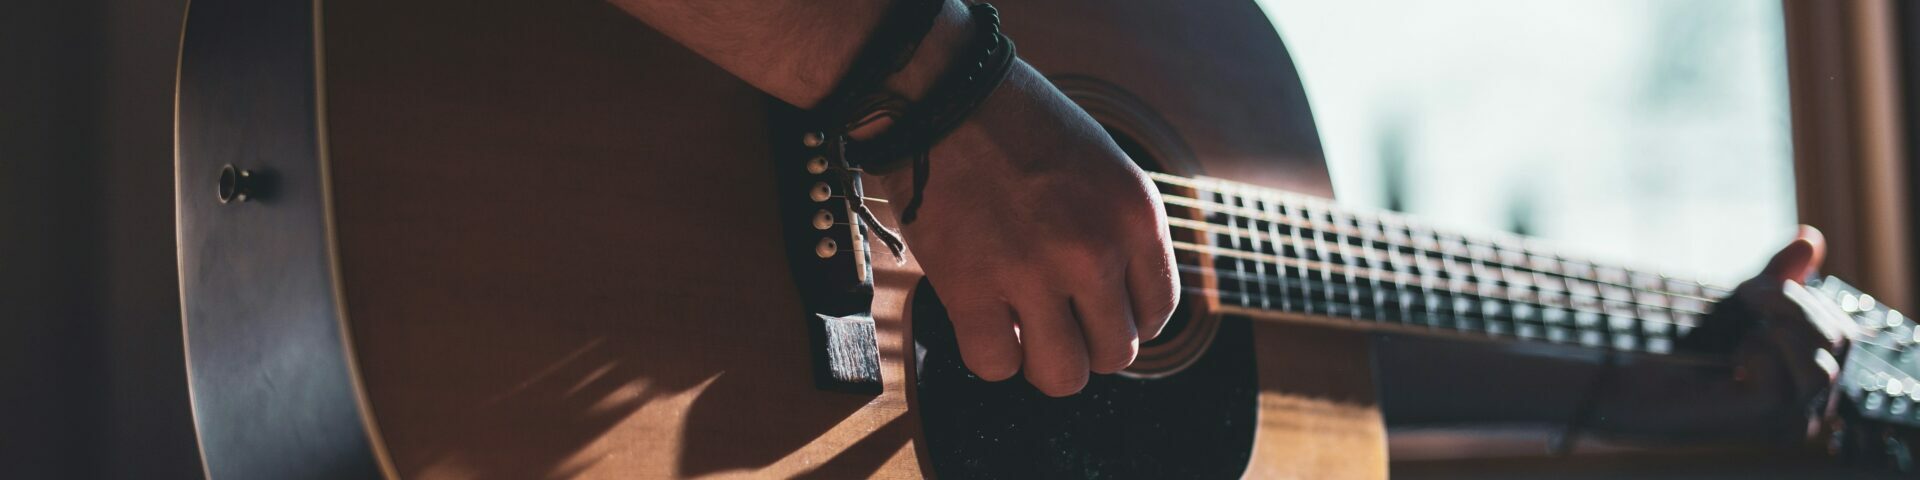 Close up photo of a person playing a guitar